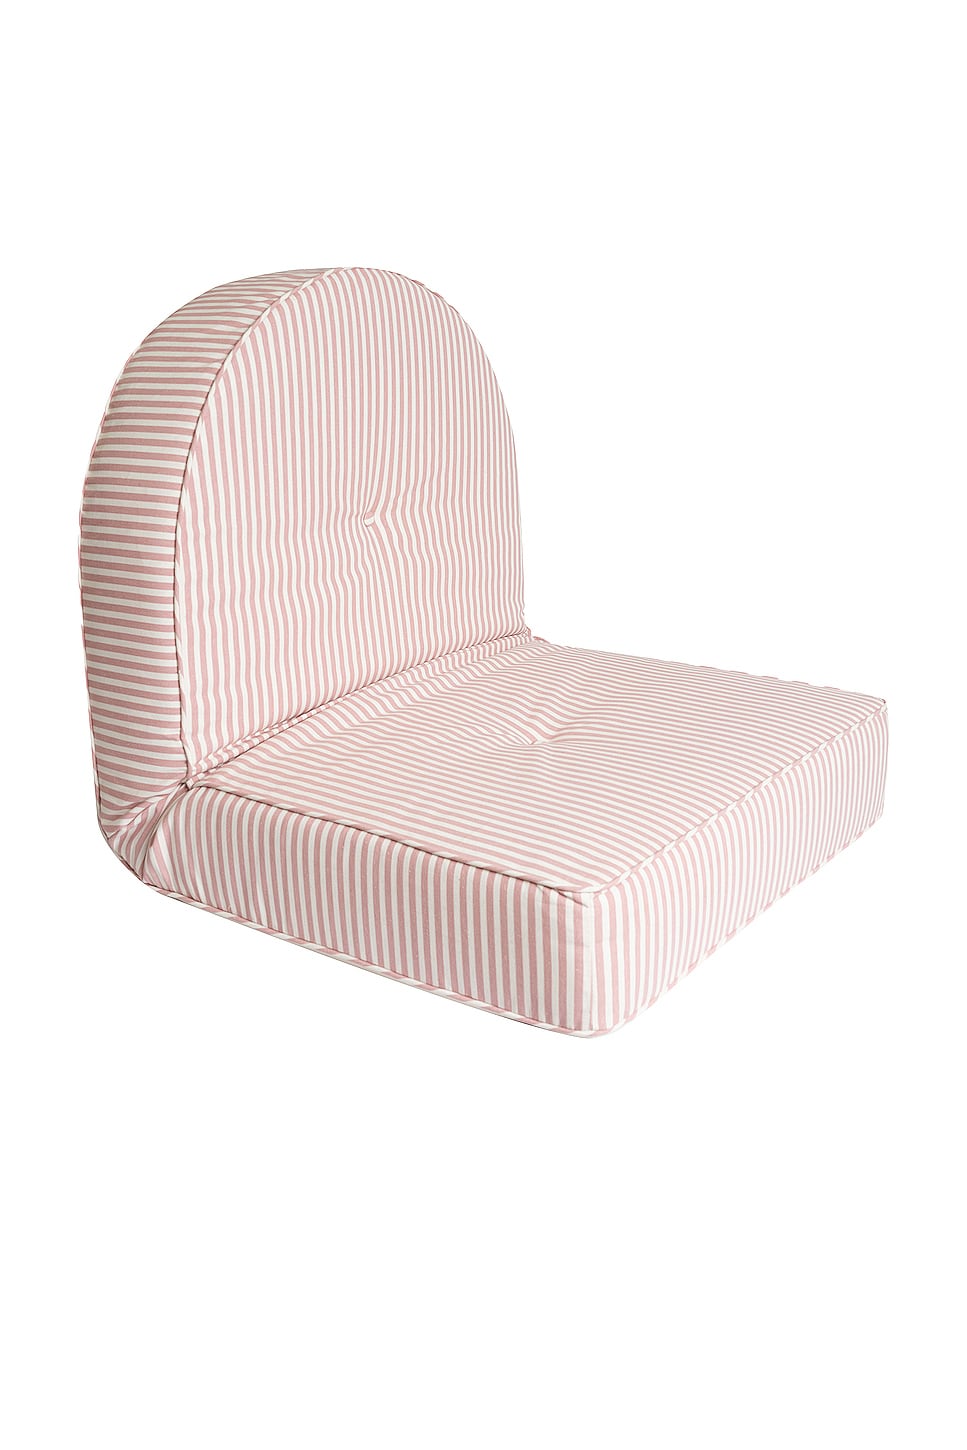 Image 1 of business & pleasure co. Reclining Pillow Lounger in Laurens Pink Stripe